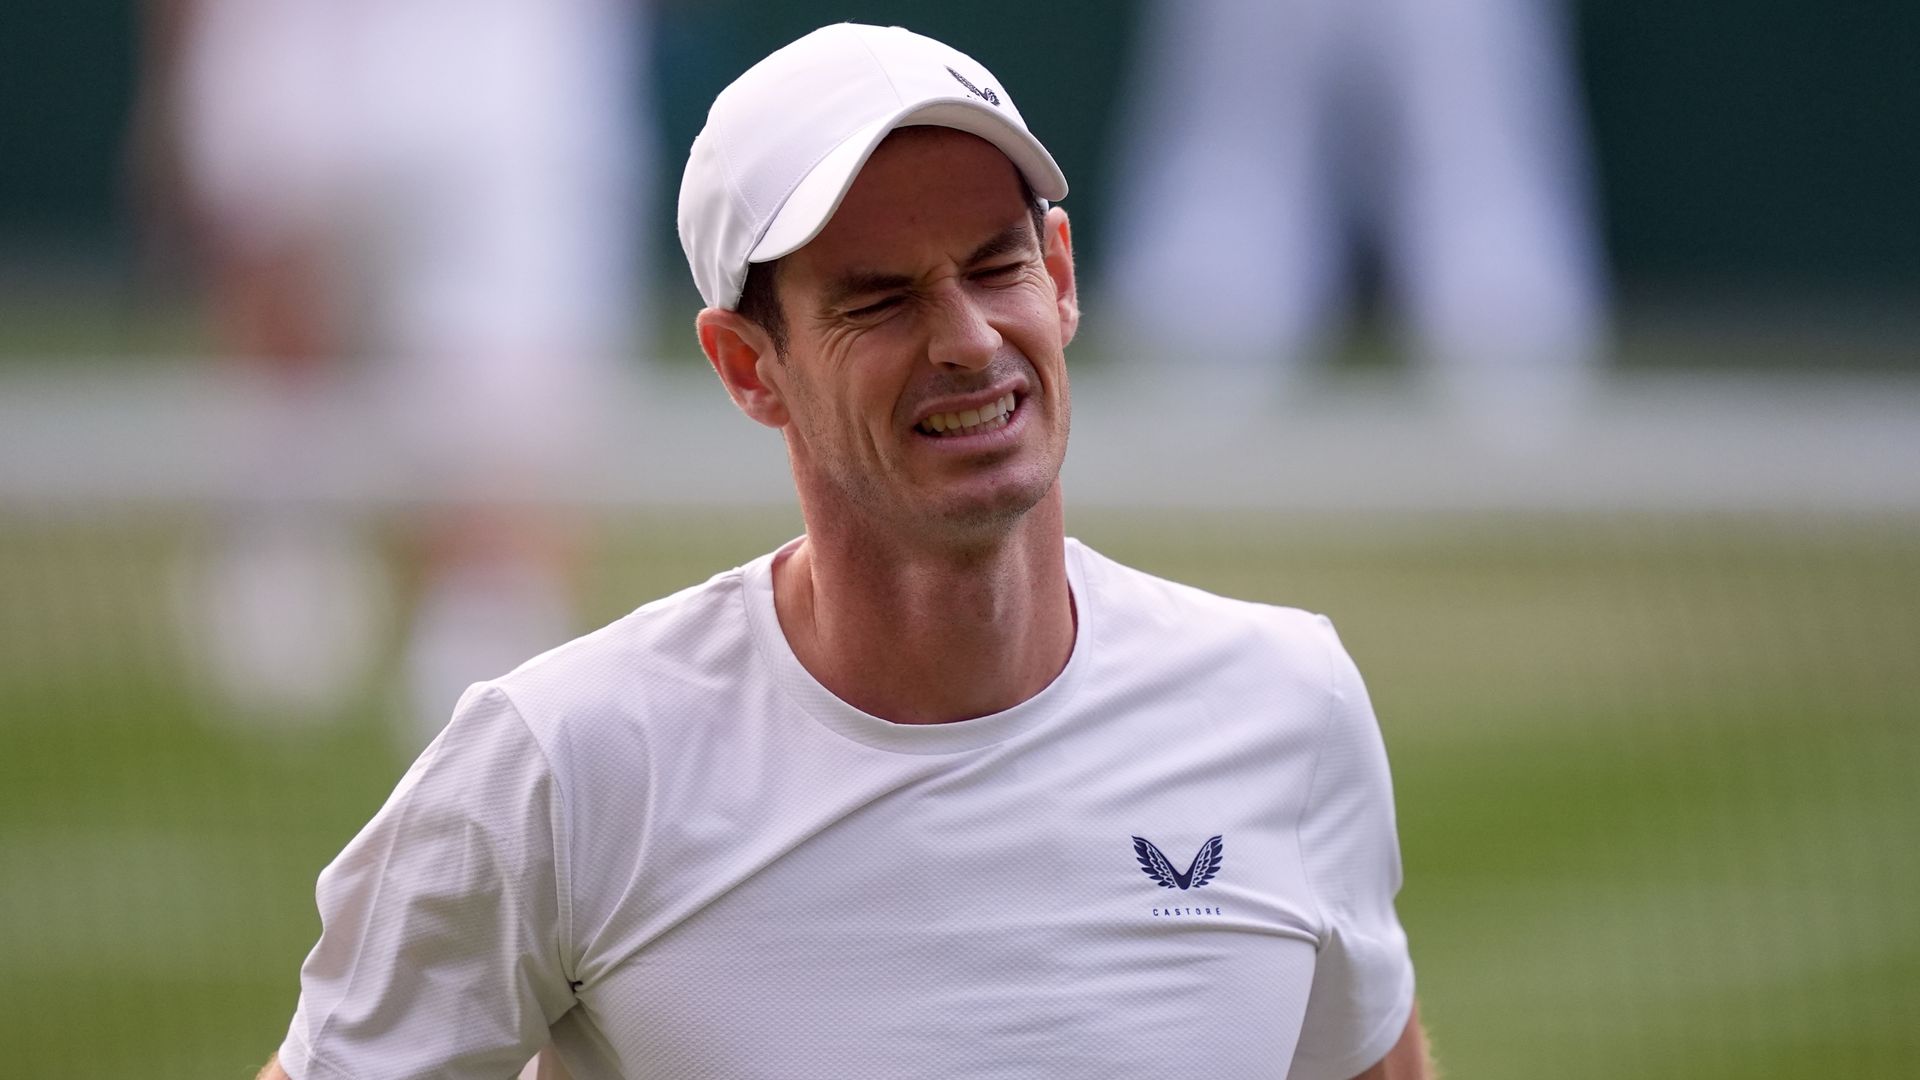 Murray's Wimbledon farewell tour begins with doubles defeat with brother